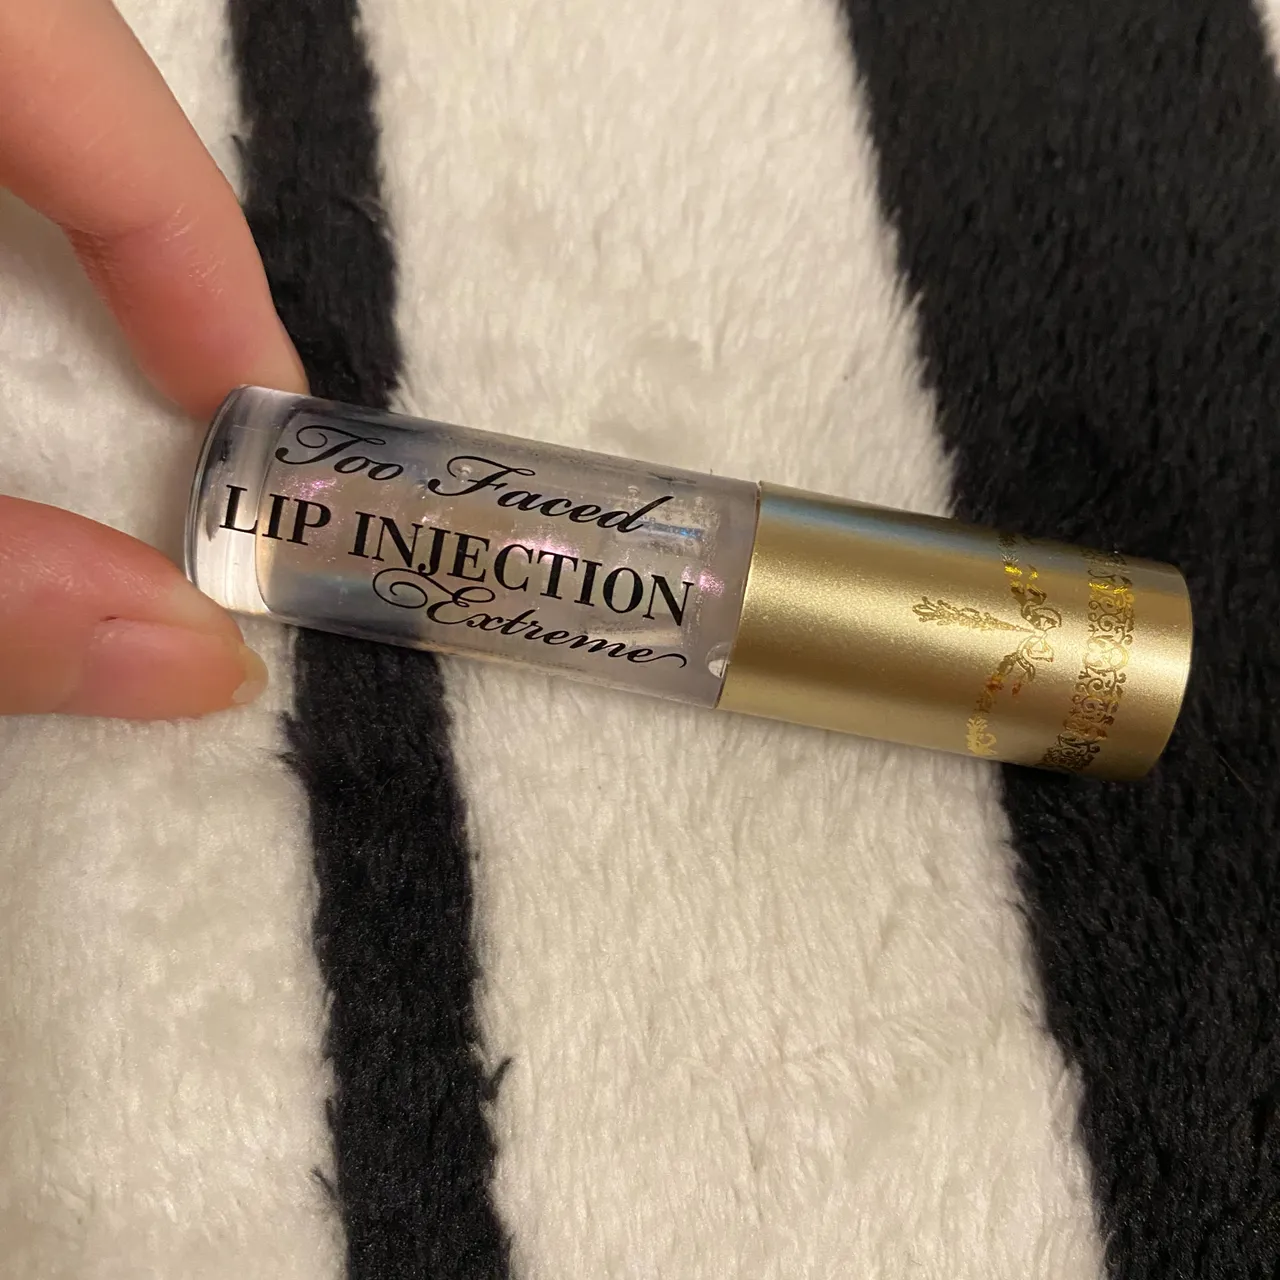 Too faced lip injection extreme mini photo 3